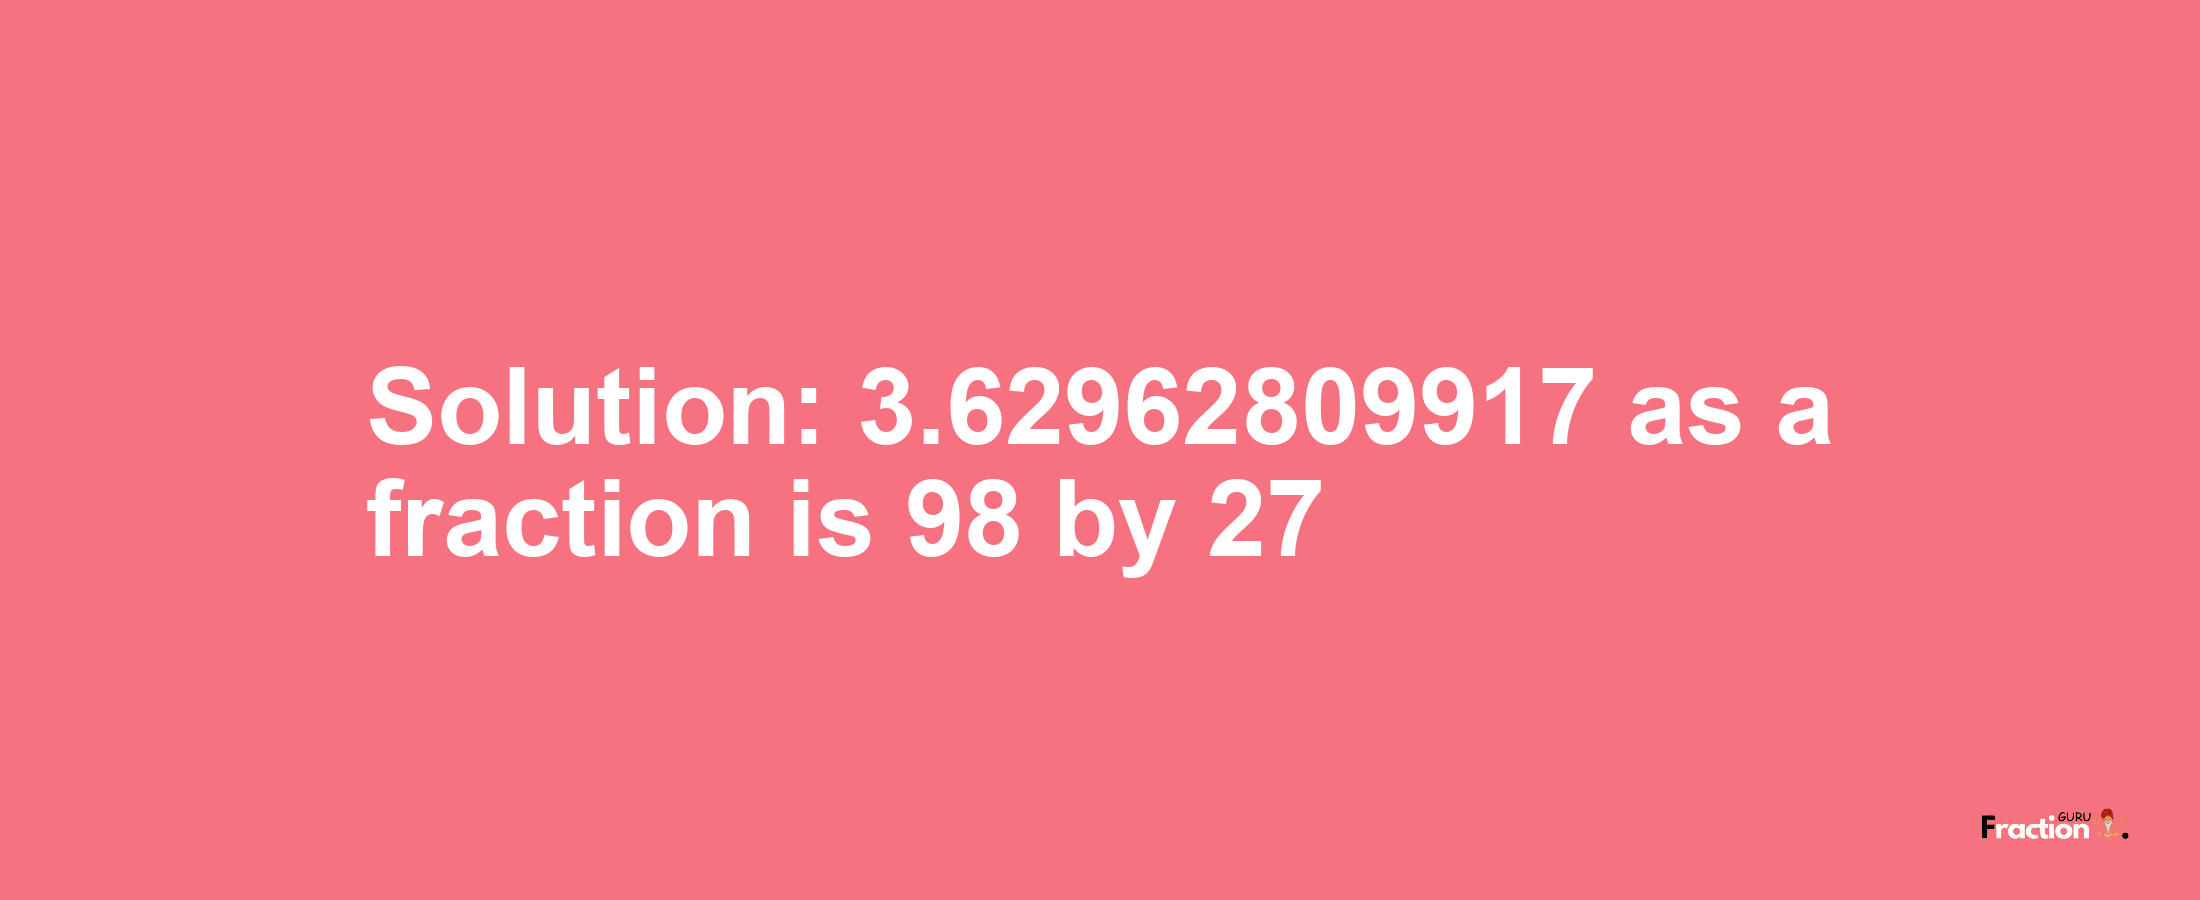 Solution:3.62962809917 as a fraction is 98/27